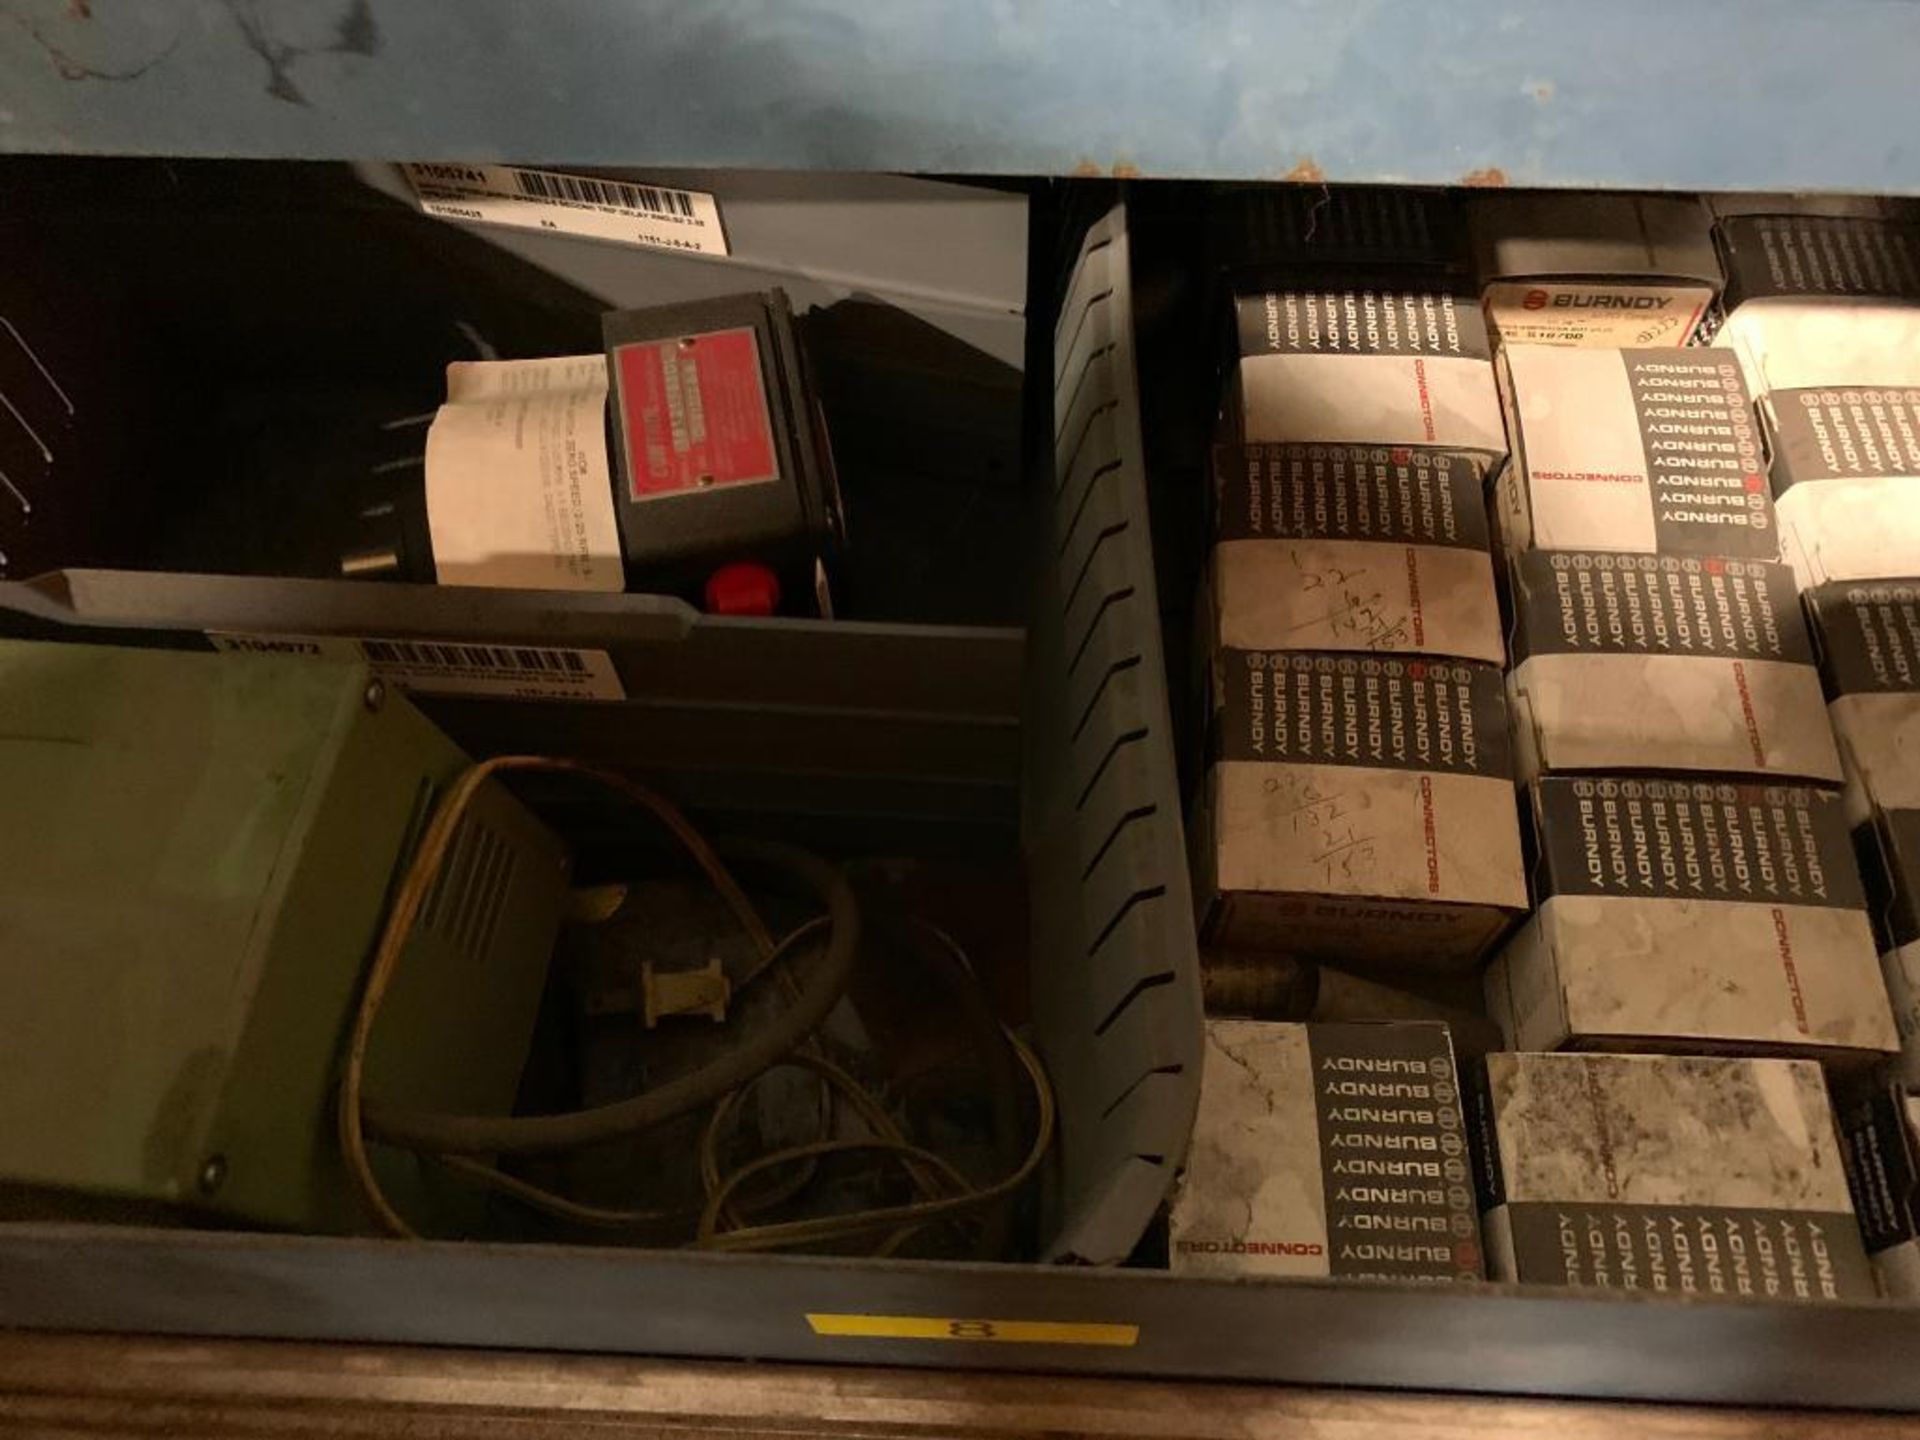 Stanley Vidmar 8-Drawer Cabinet w/ Assorted Switches, Relays, Timers, Electrical Connectors - Image 9 of 9